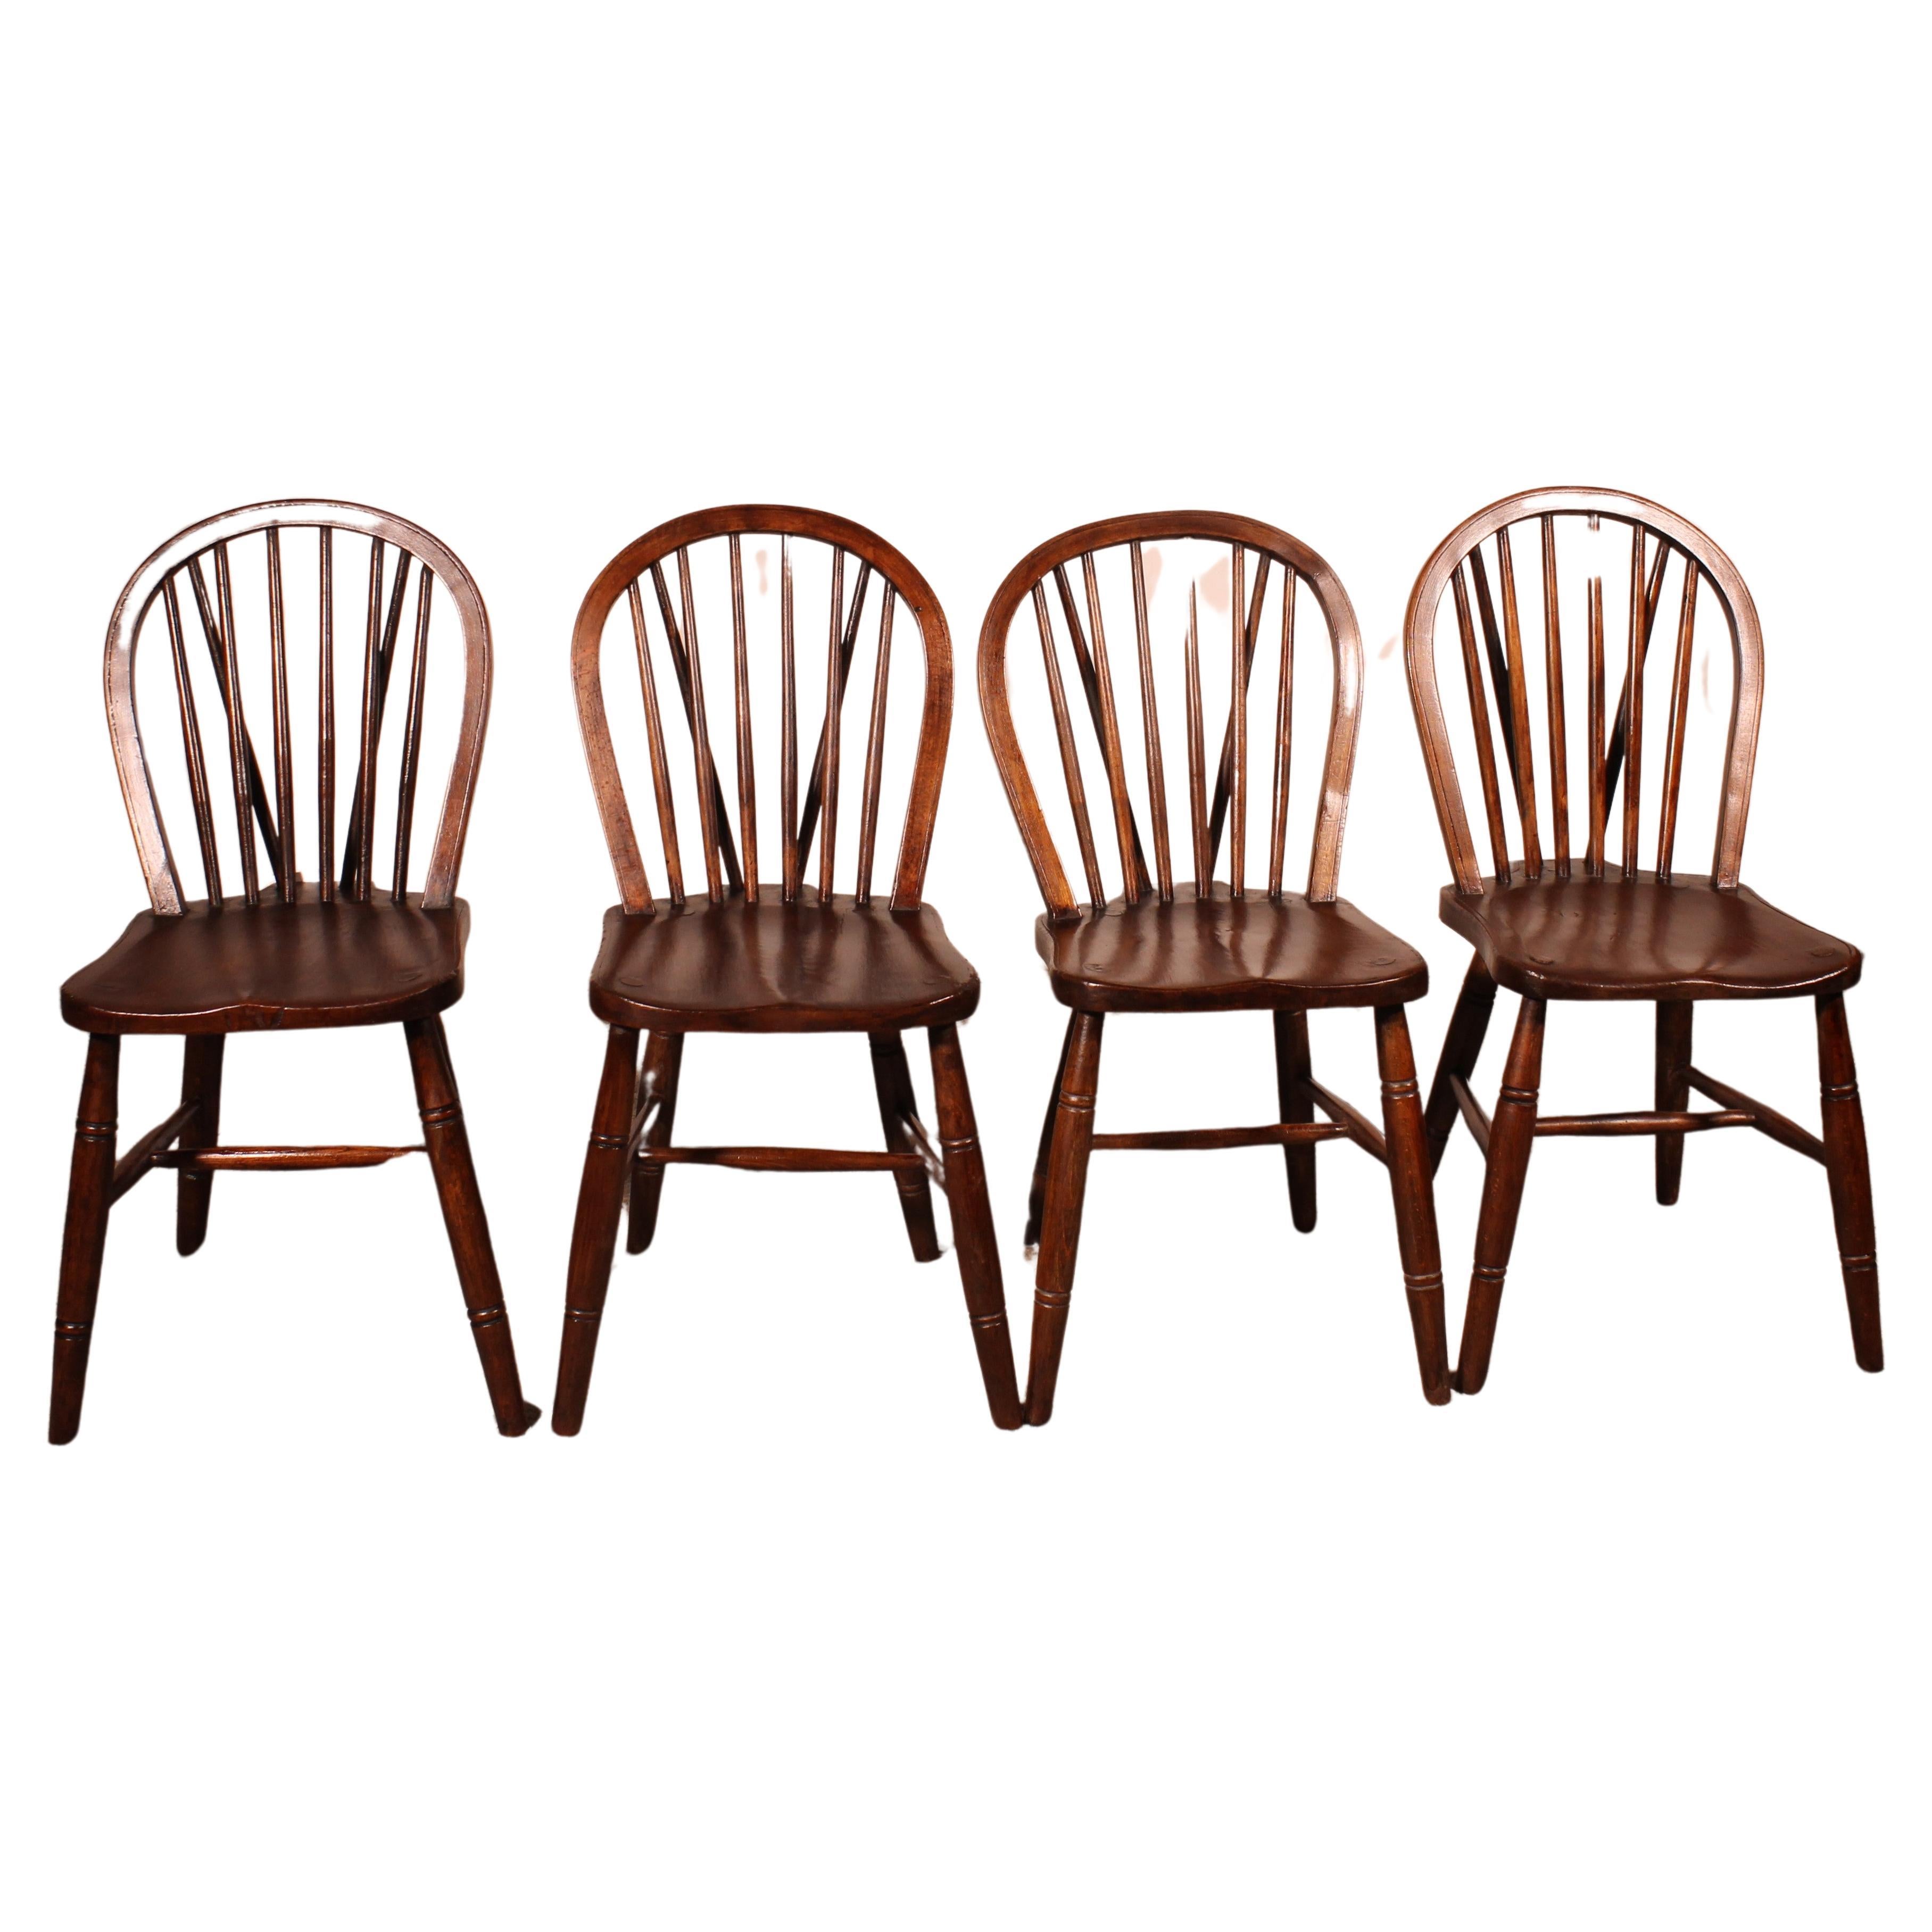 Set Of 4 Windsor Chairs From The 19th Century